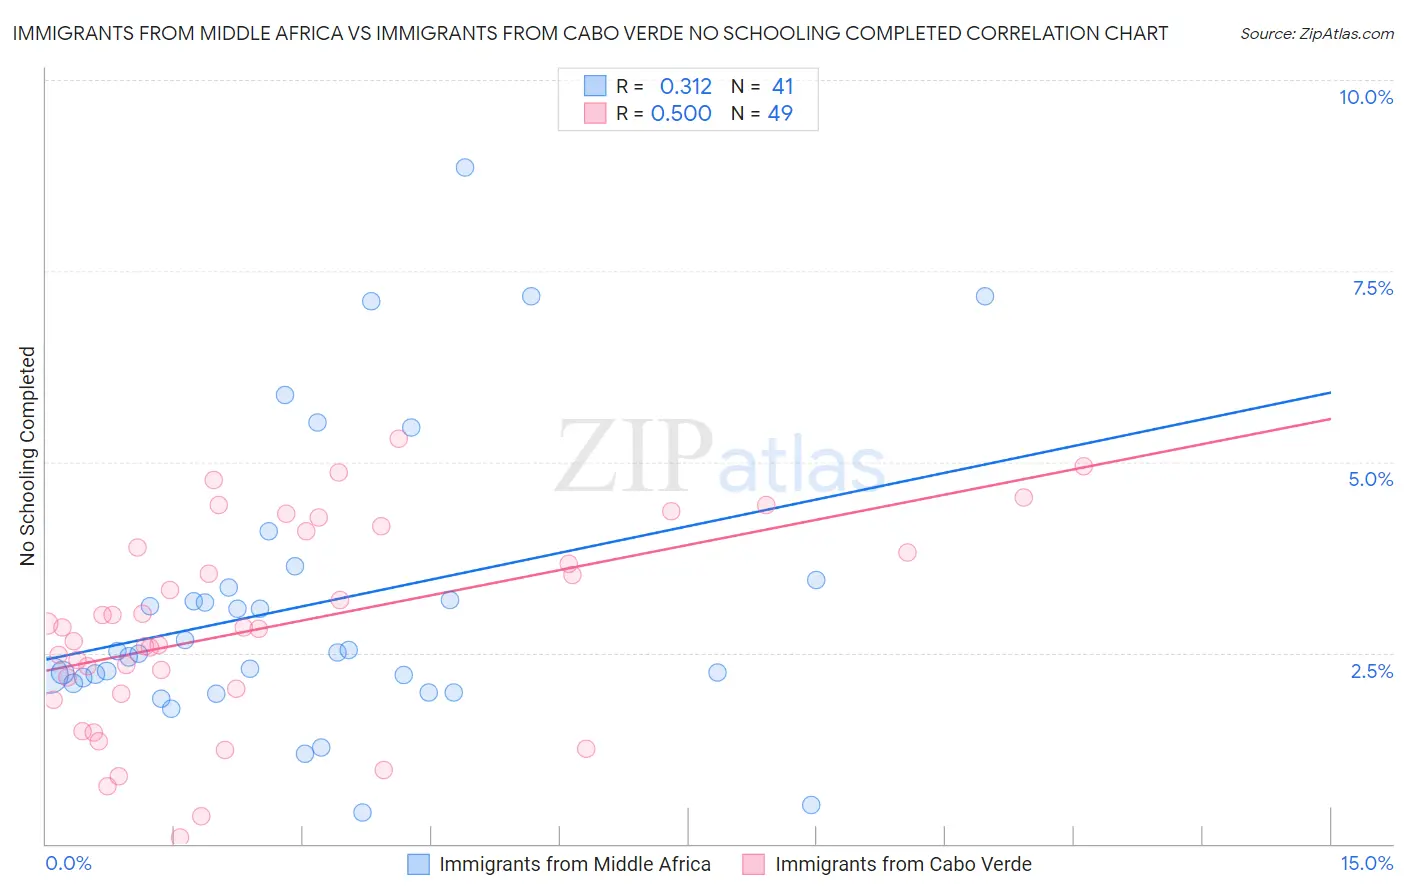 Immigrants from Middle Africa vs Immigrants from Cabo Verde No Schooling Completed